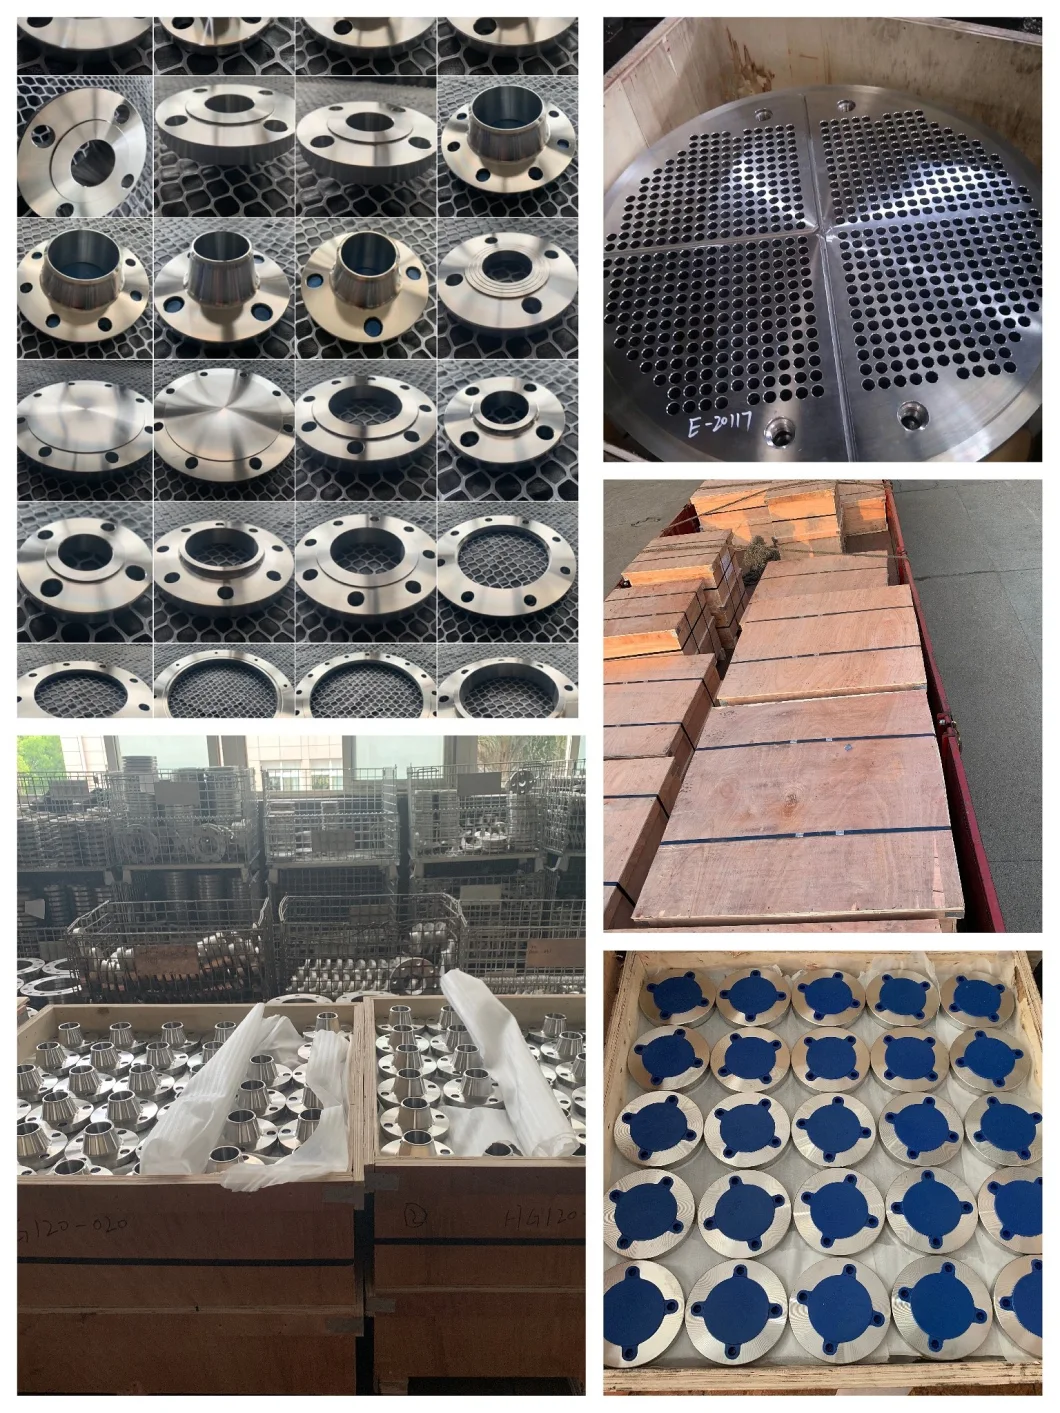 Forged Flange Stainless Steel Flange ASTM A312 TP304L DN150 Class 150 Plate Flange ASME B16.5 for Connection Cdfl206